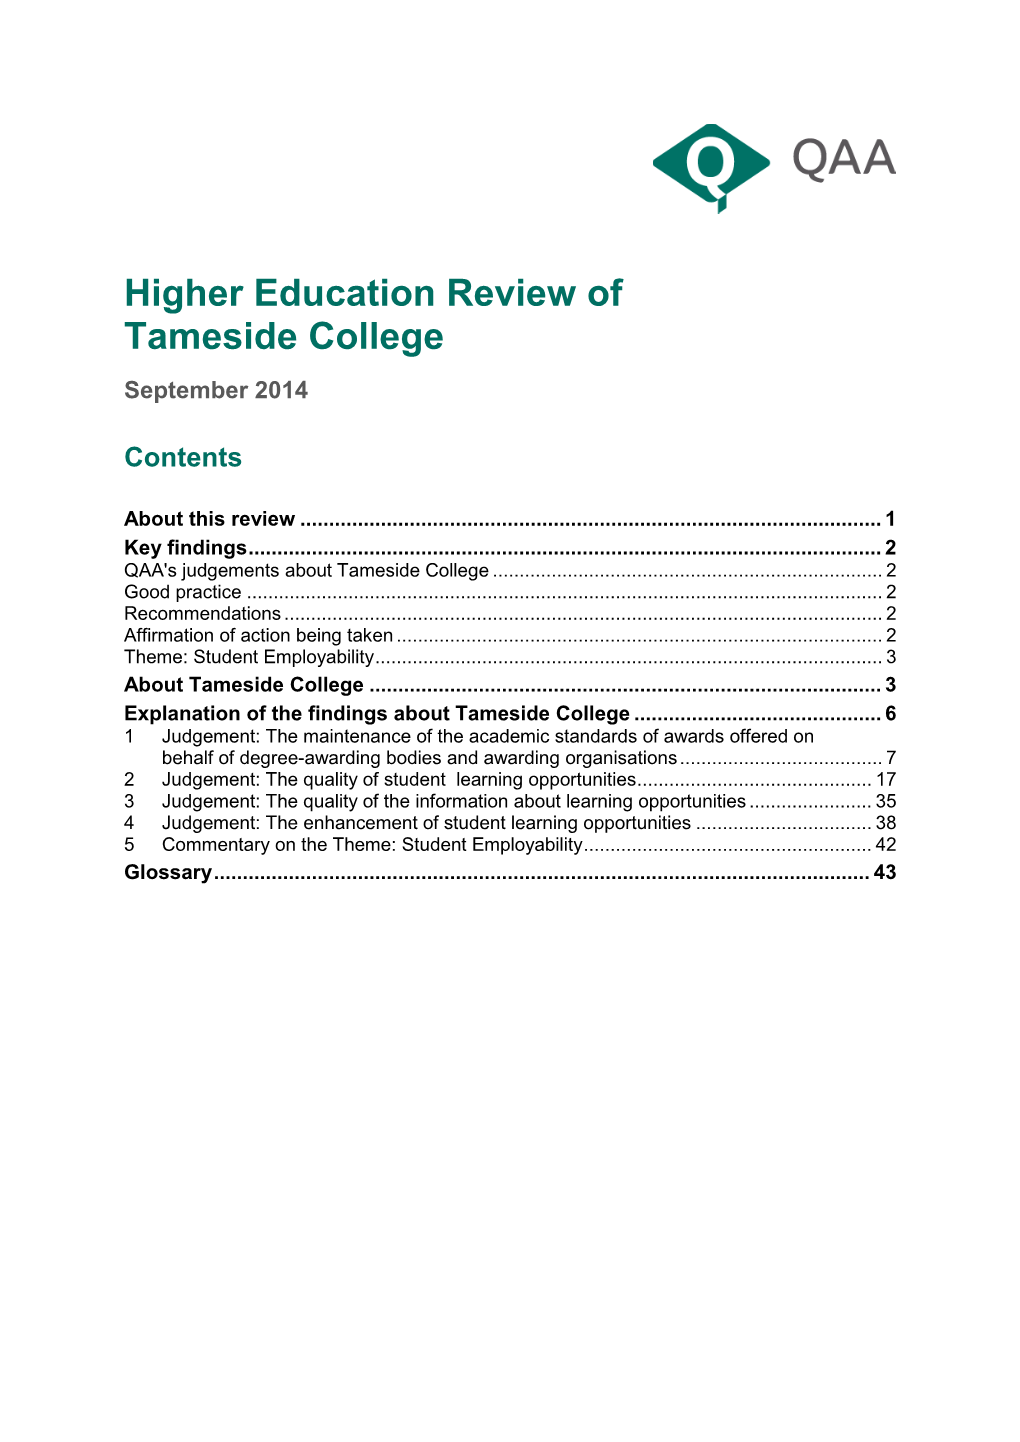 Higher Education Review: Tameside College, September 2014